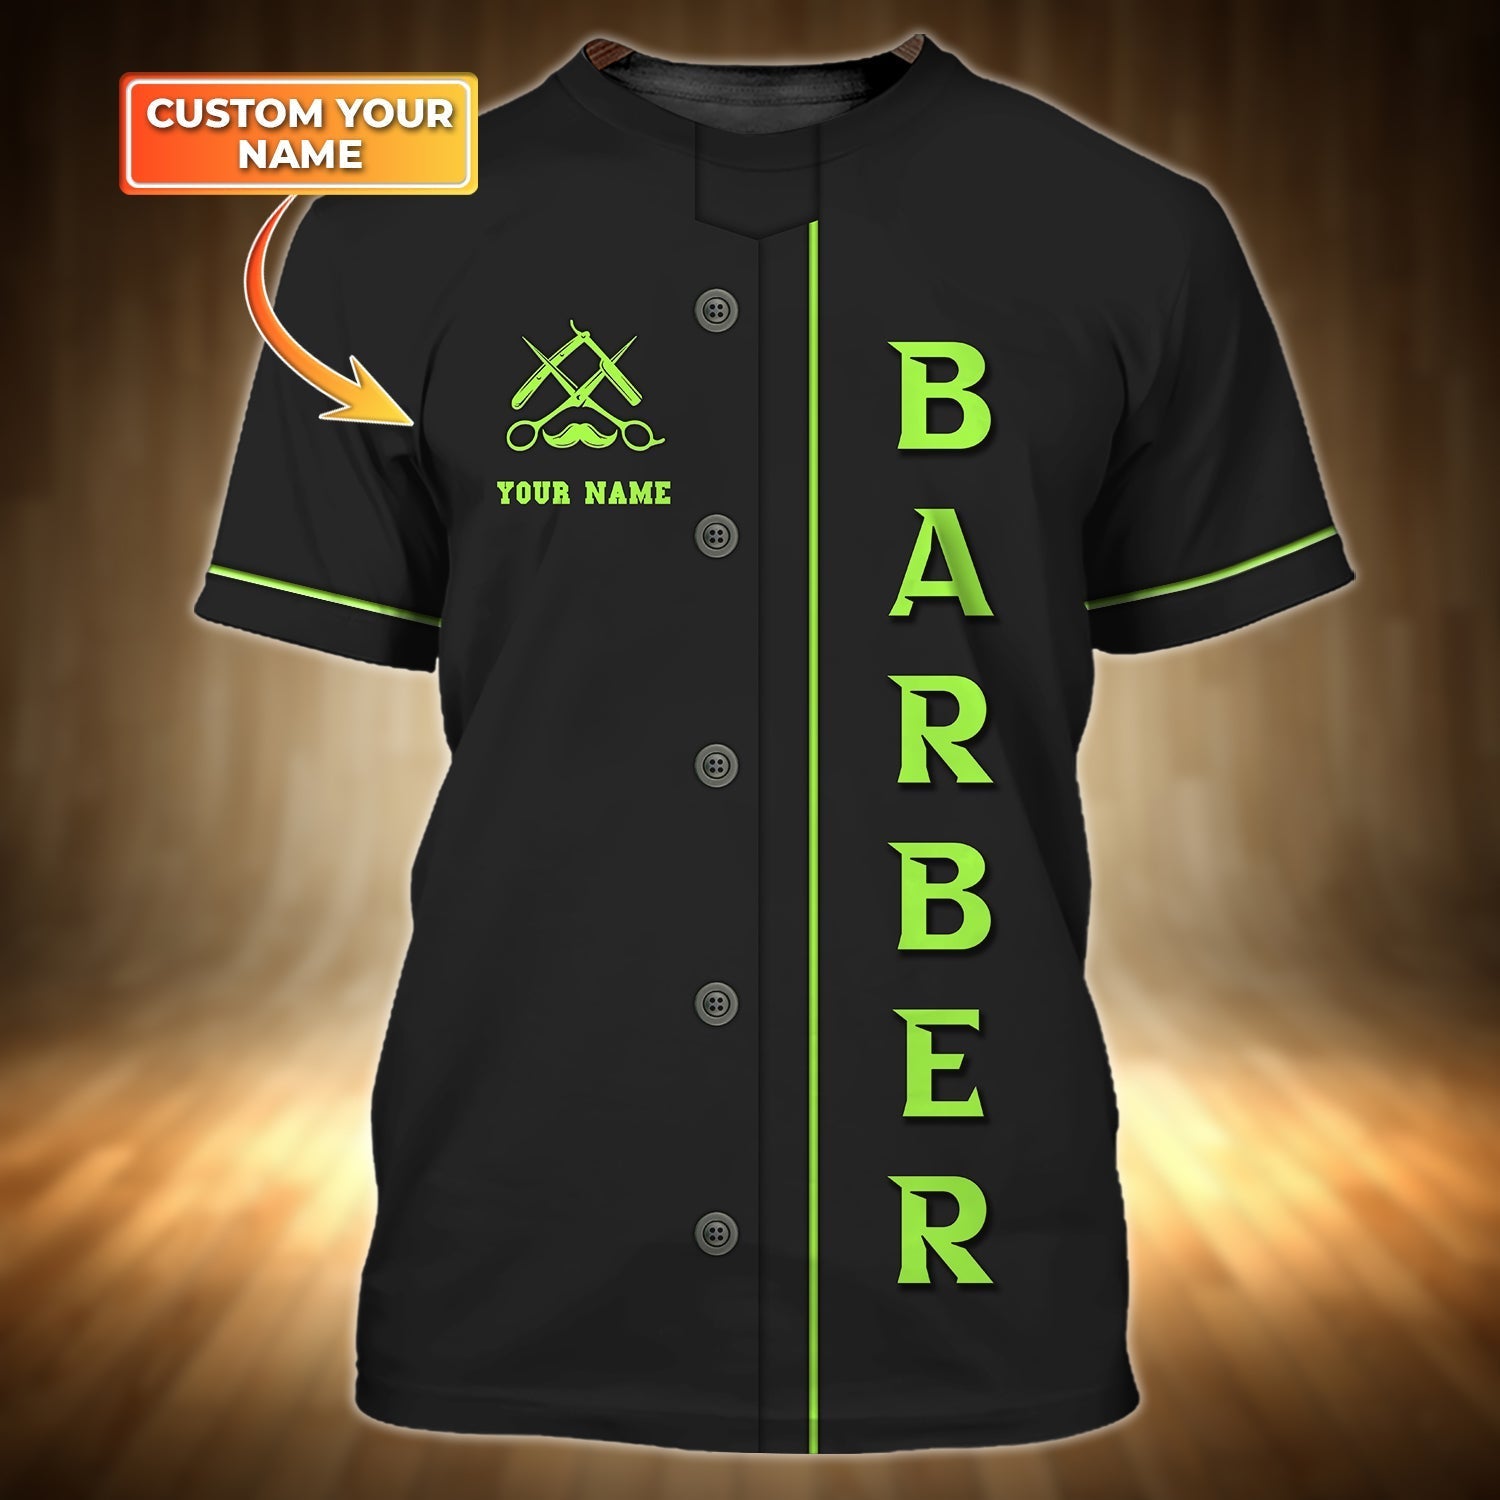 Personalized 3D Full Printed Barber Shop T Shirt/ Barber Men Shirt/ Gift For Barber Men